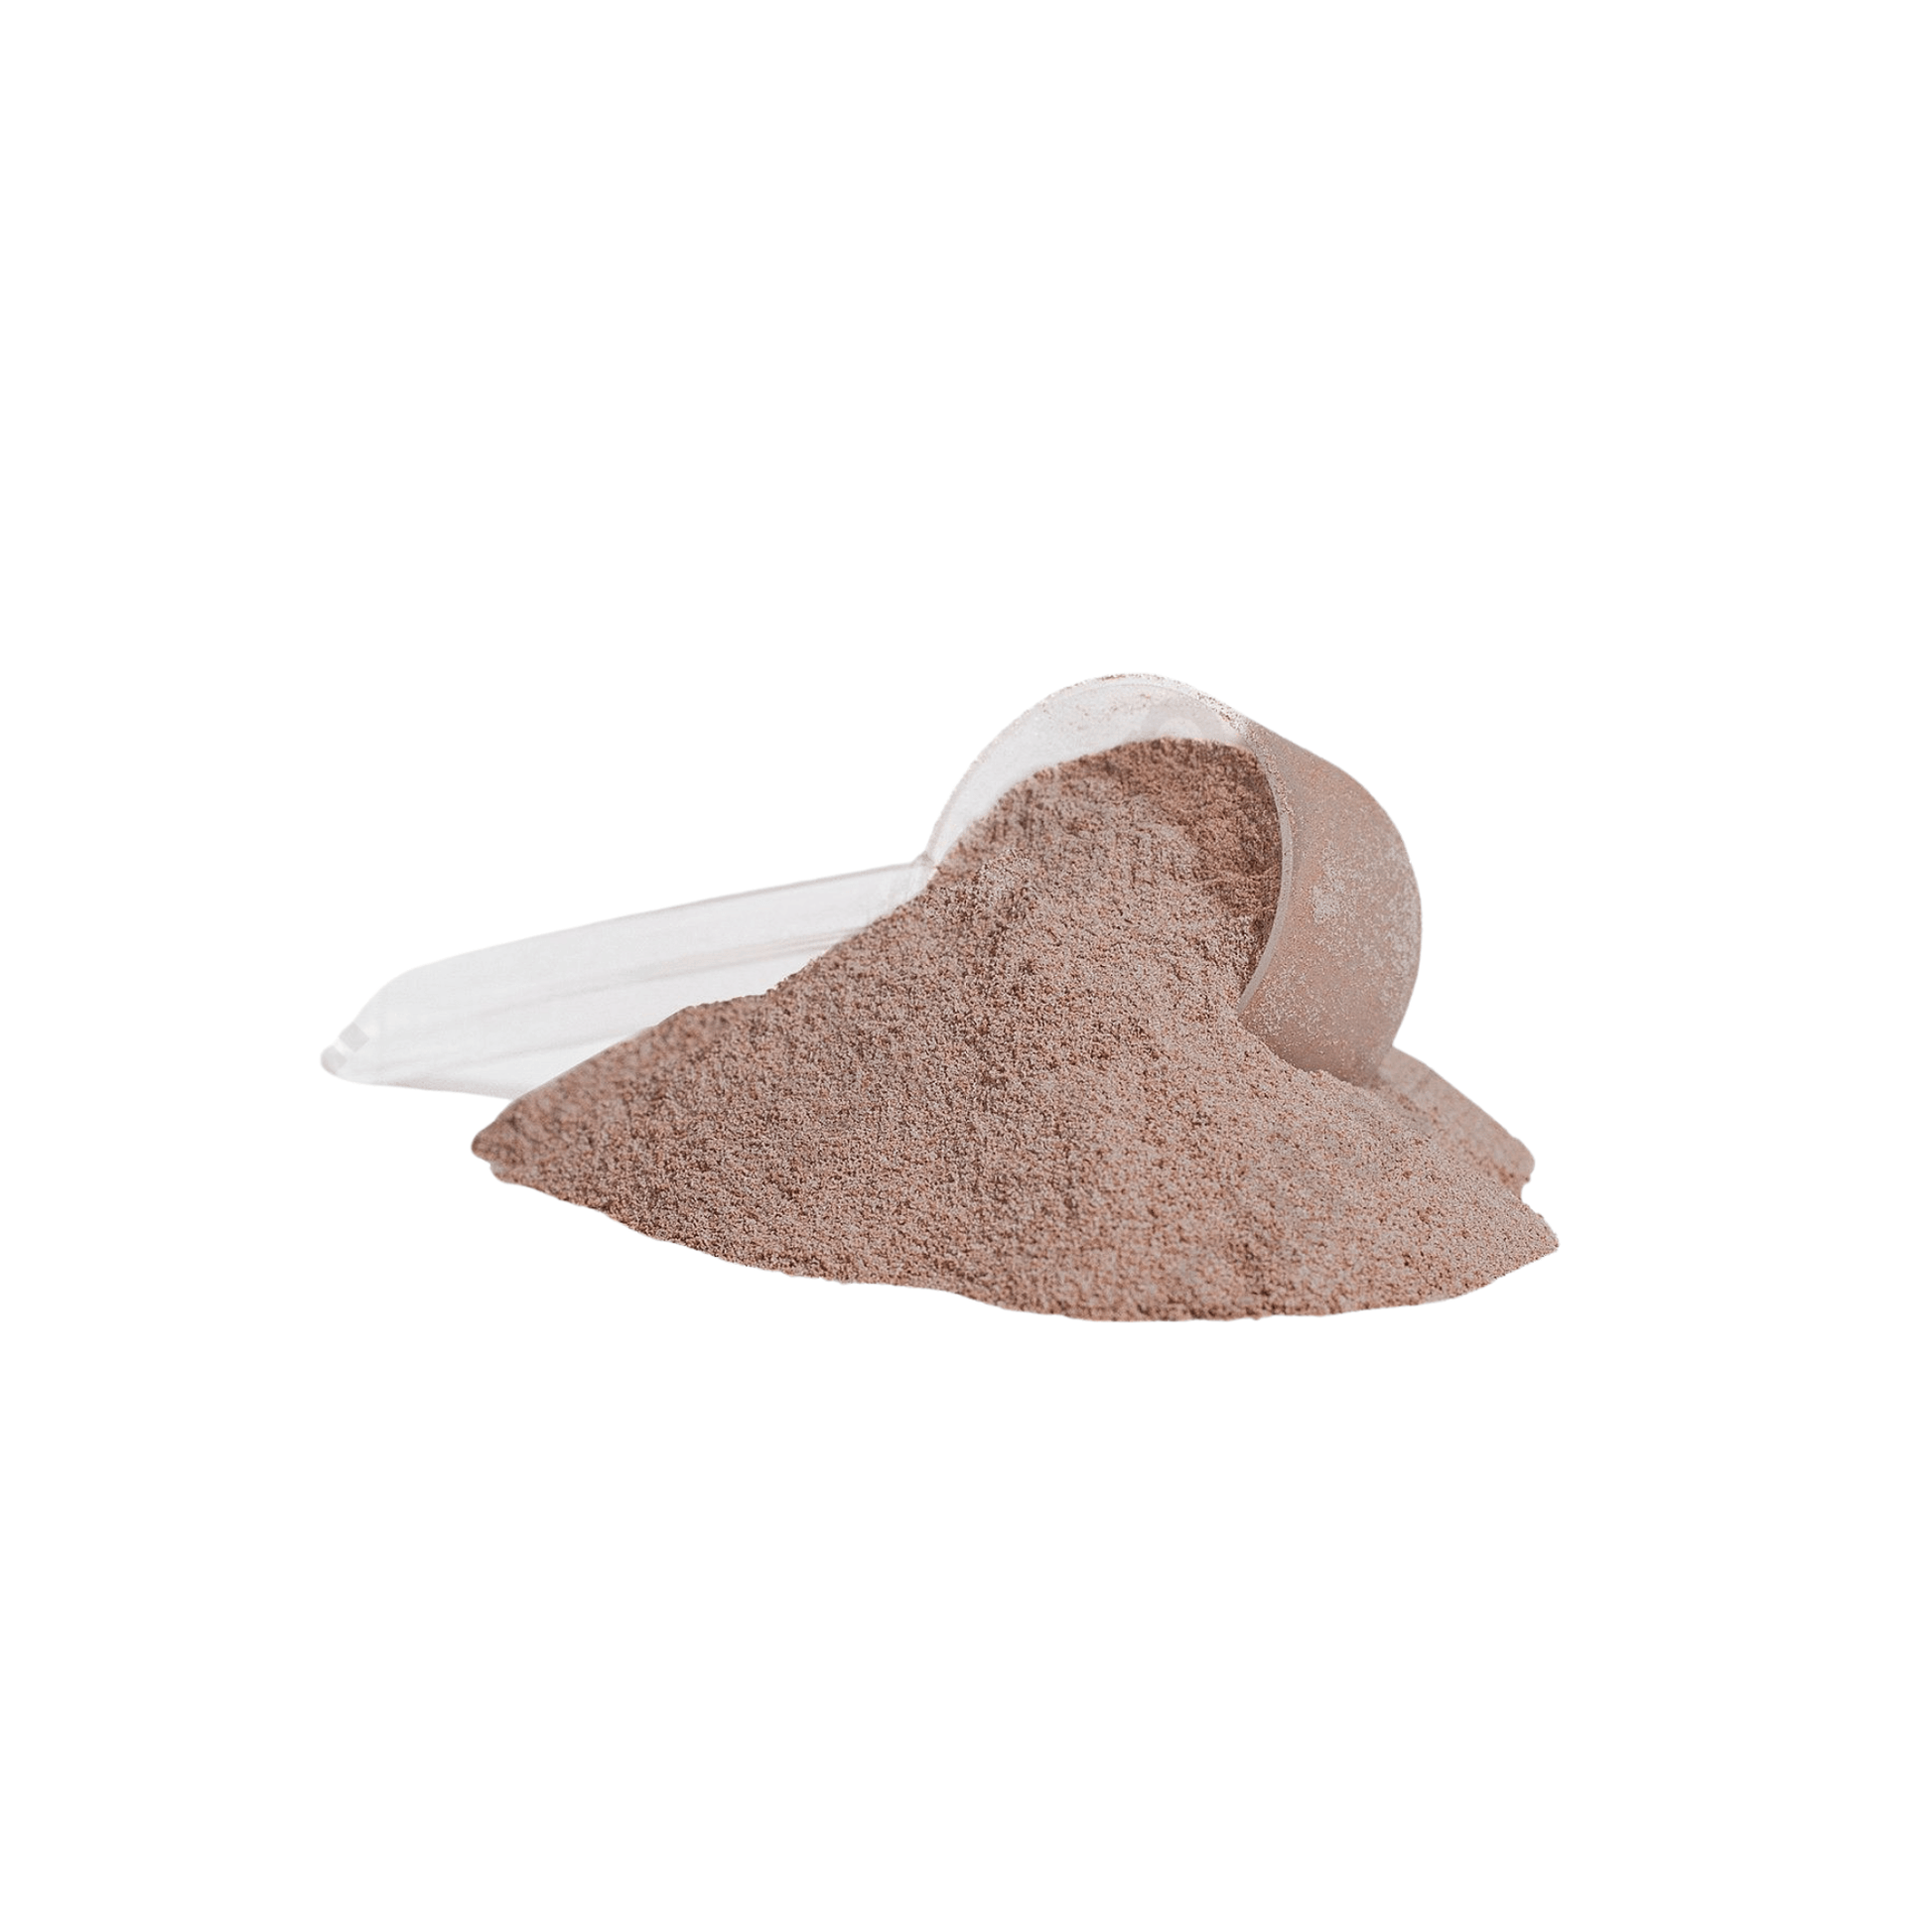 "FORZA" Whey Protein (Chocolate) - OnlyFit